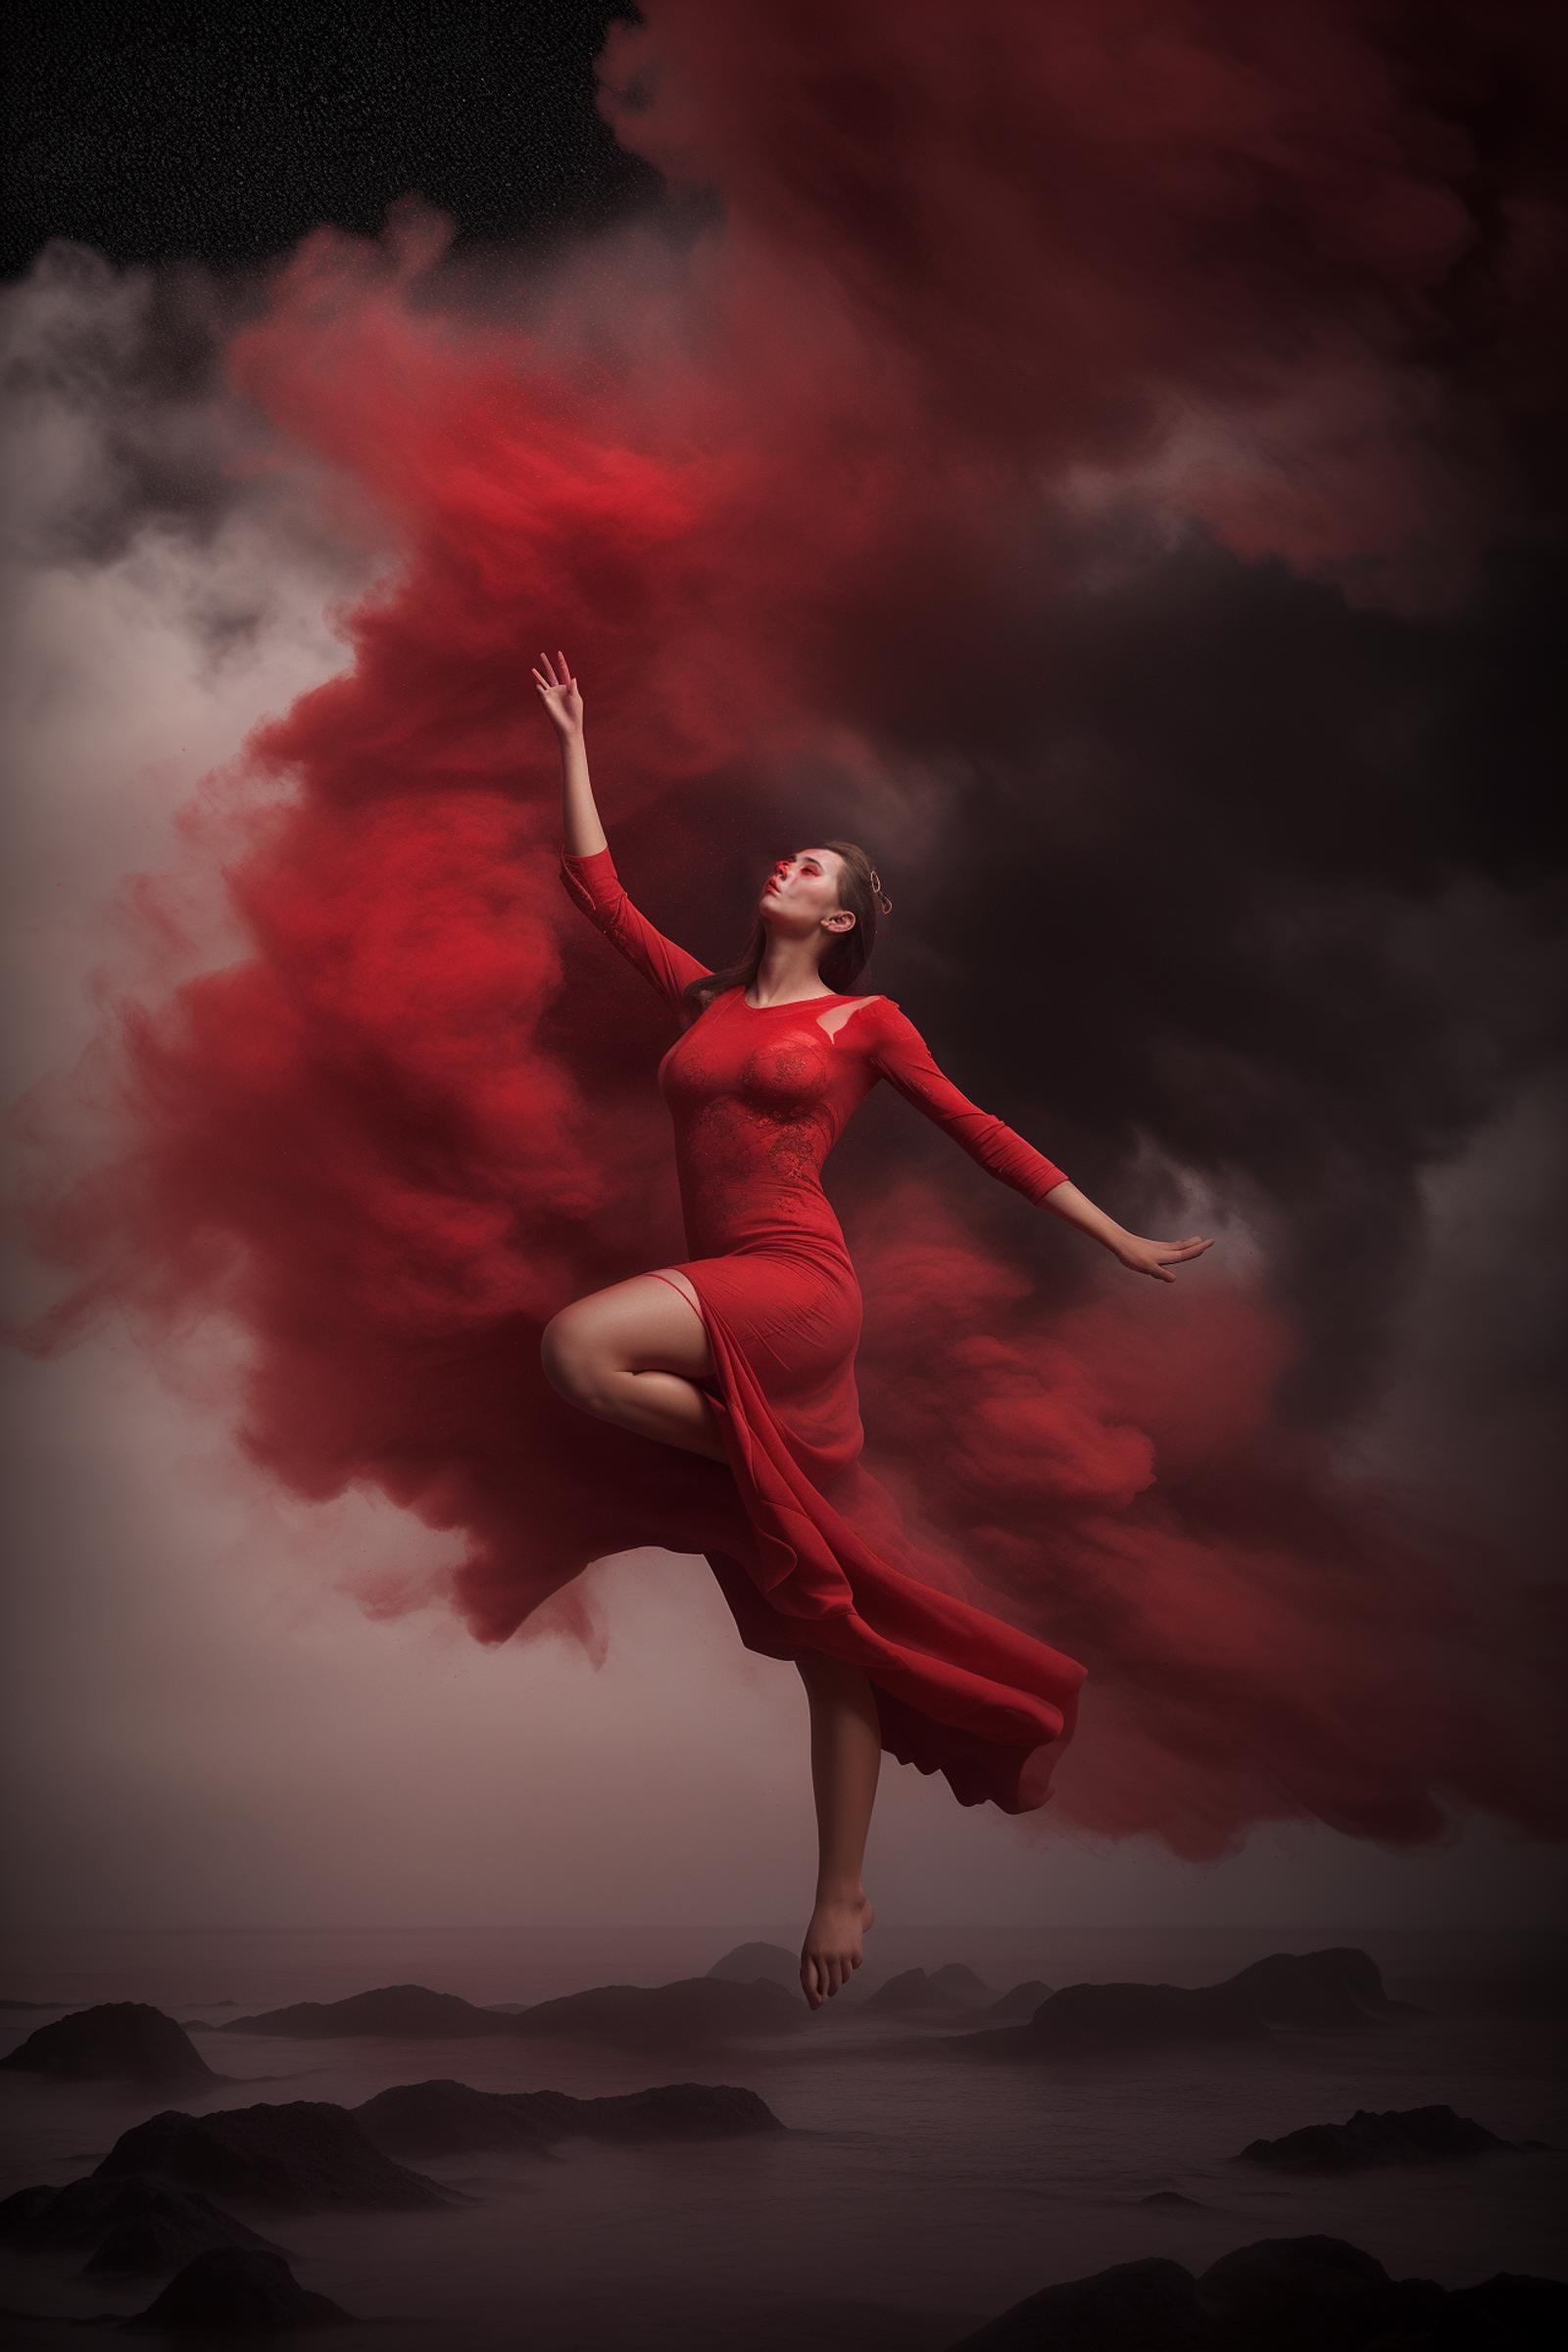 A woman in a red dress dancing in a cloud of red smoke.